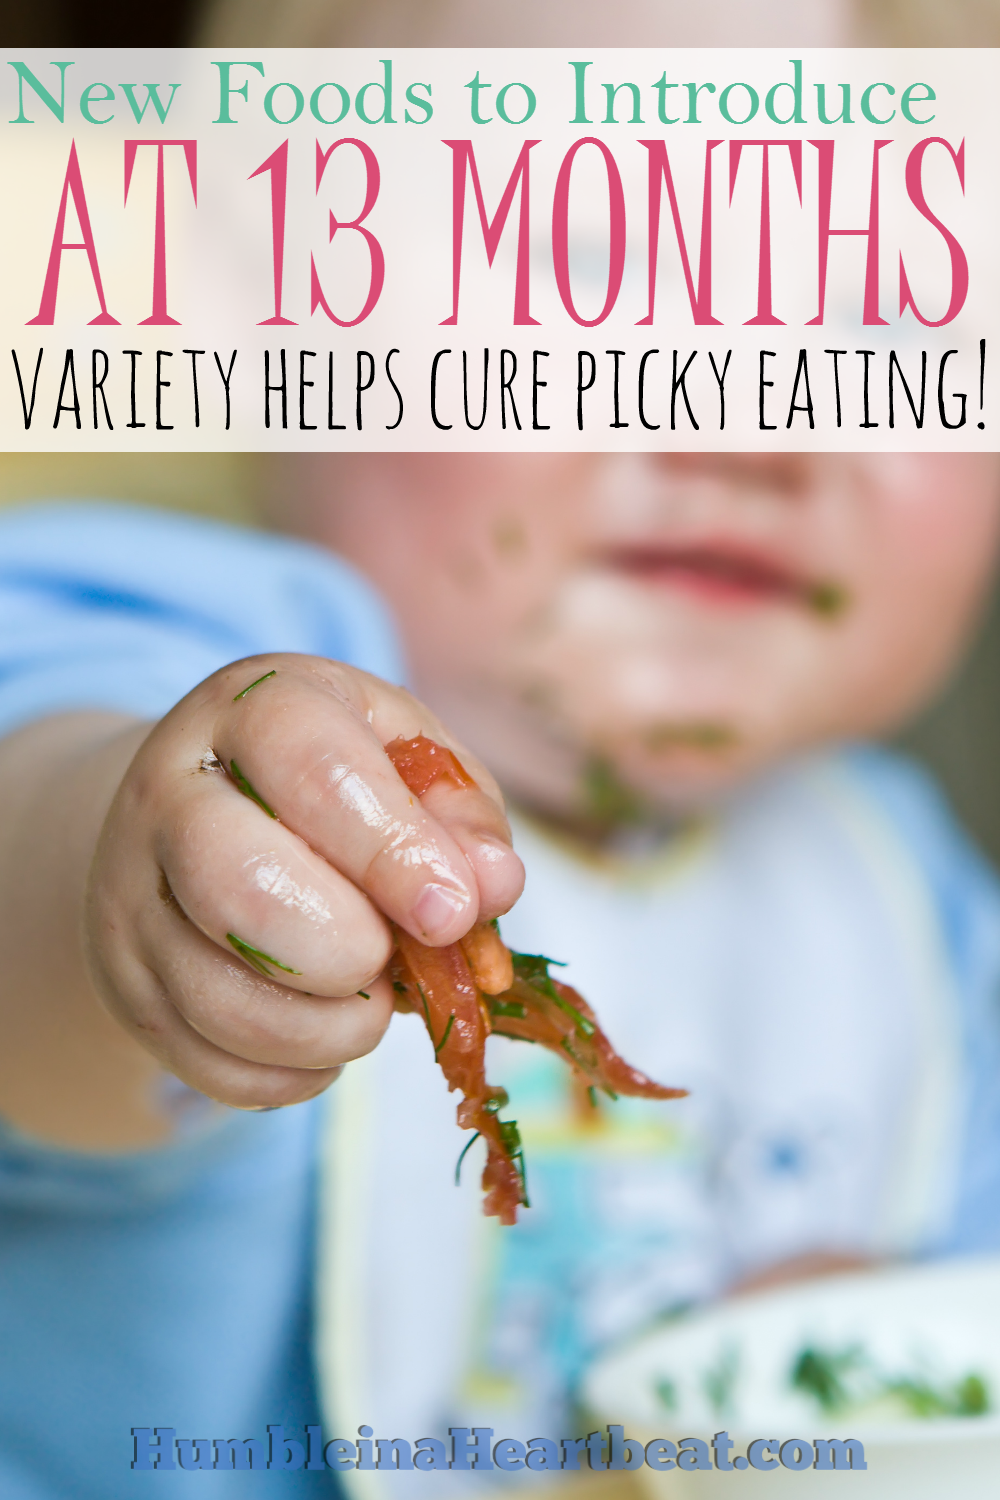 What's your baby eating now that he's one? Are you still offering variety? Here are some healthy foods you can introduce to add some variety to his diet.